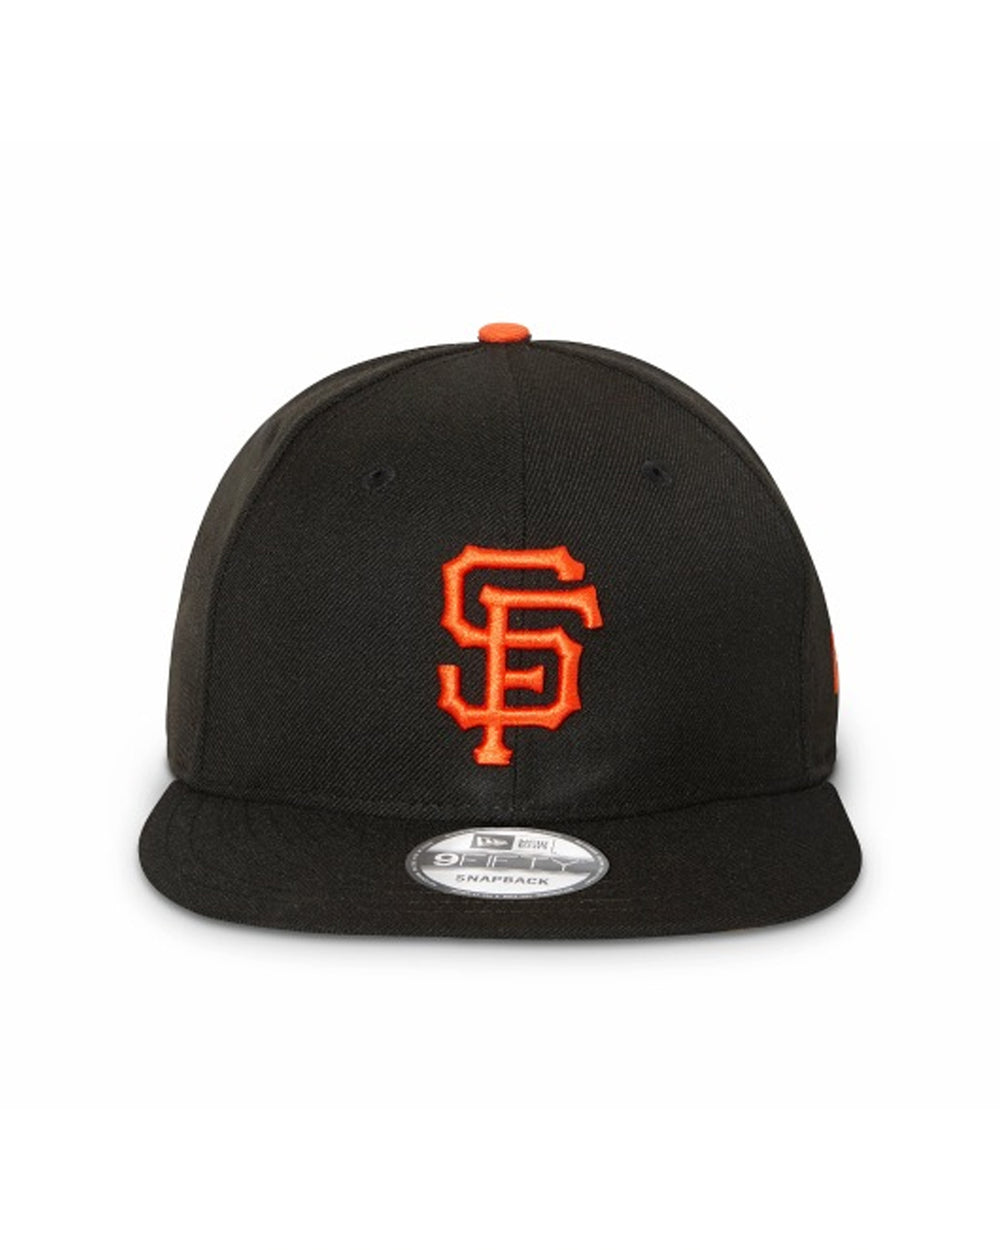 San Francisco Giants Official Team Colours 9FIFTY Snapback